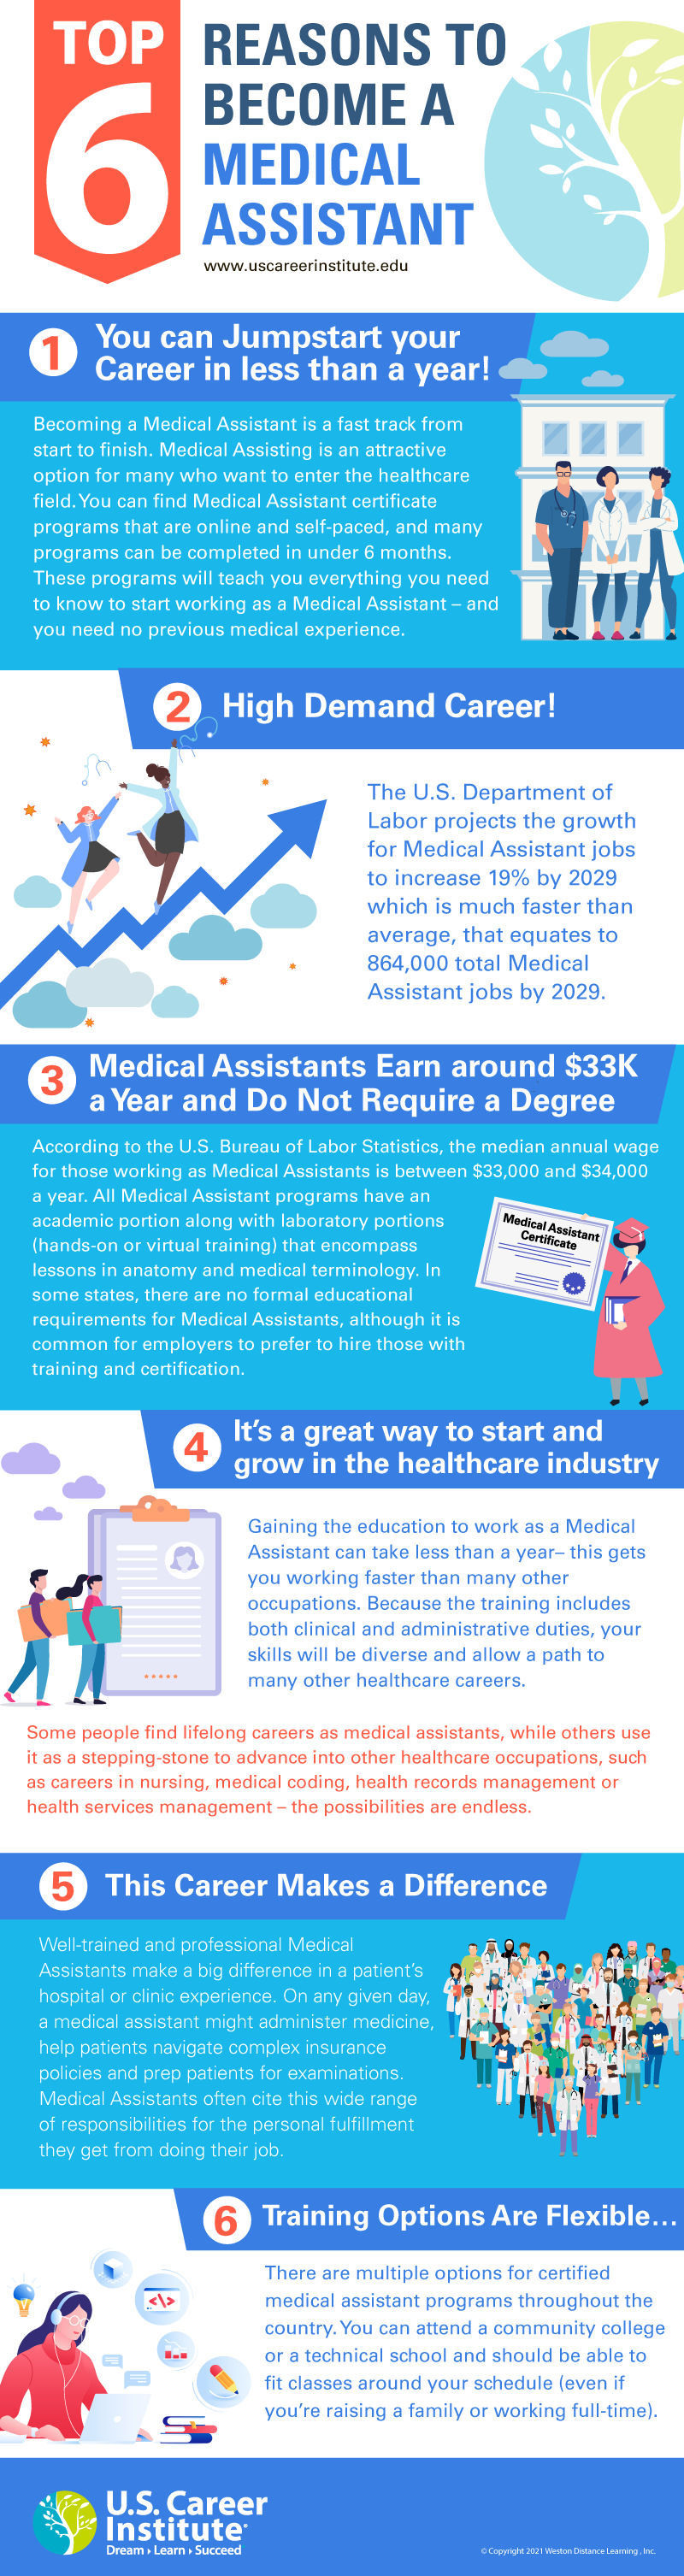 Infographic on top 6 reasons to become a Medical Assistant